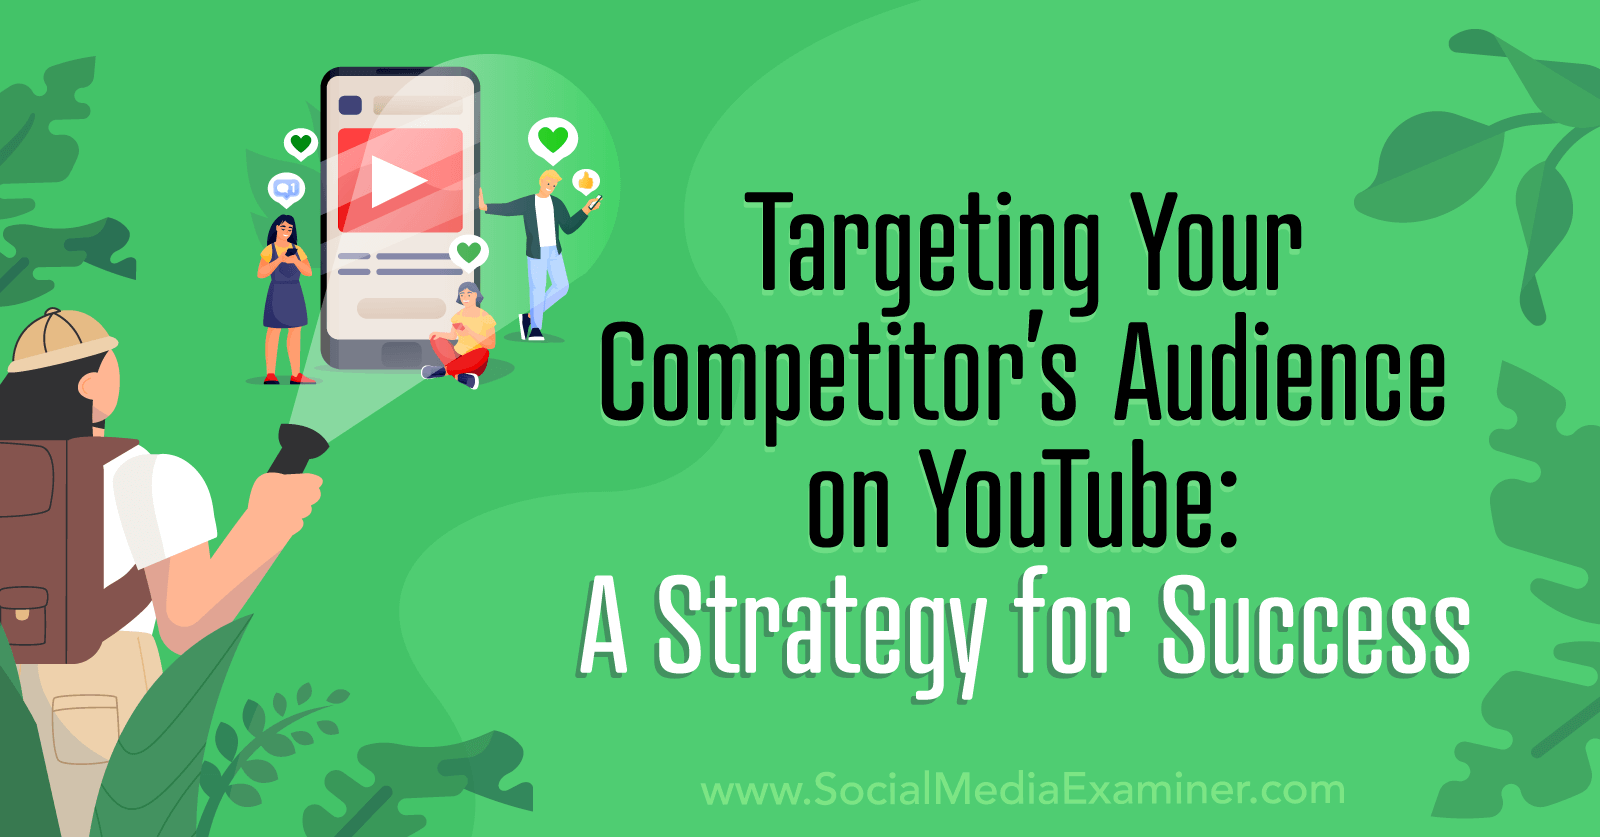 Targeting Your Competitors’ Audiences on YouTube: A Strategy for Success by Social Media Examiner